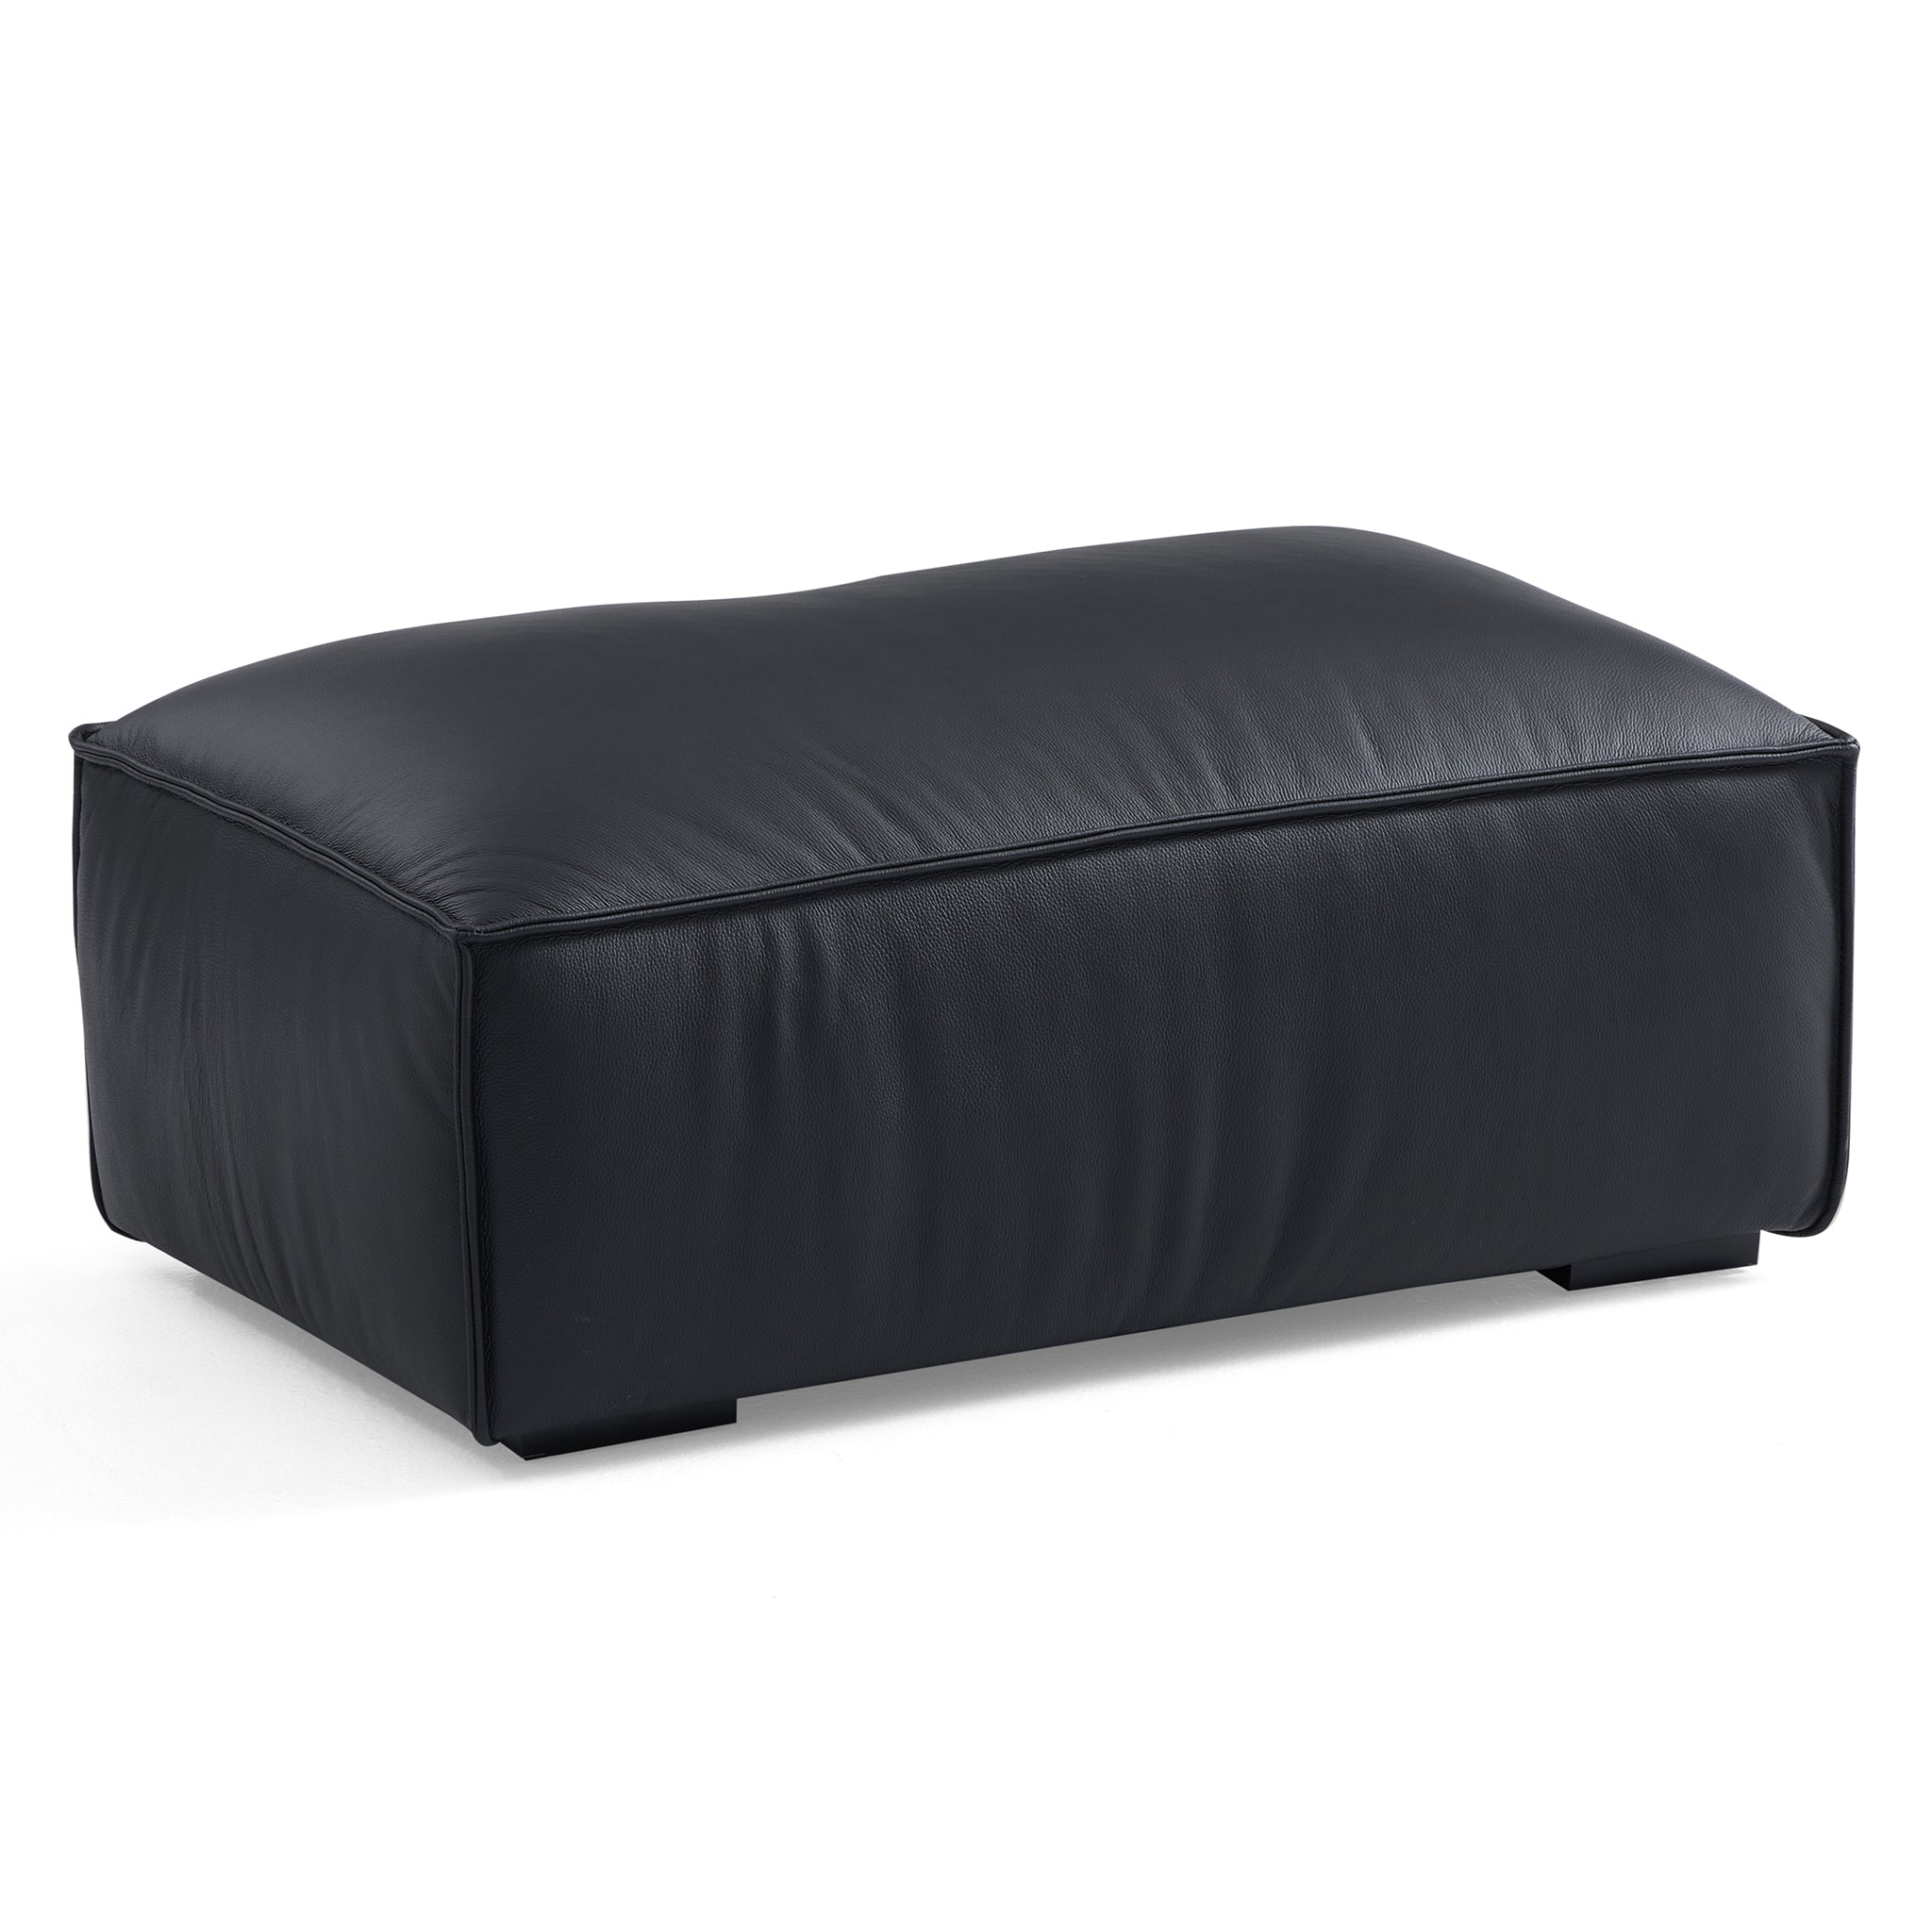 Luxury Minimalist Black Leather Sectional And Ottoman